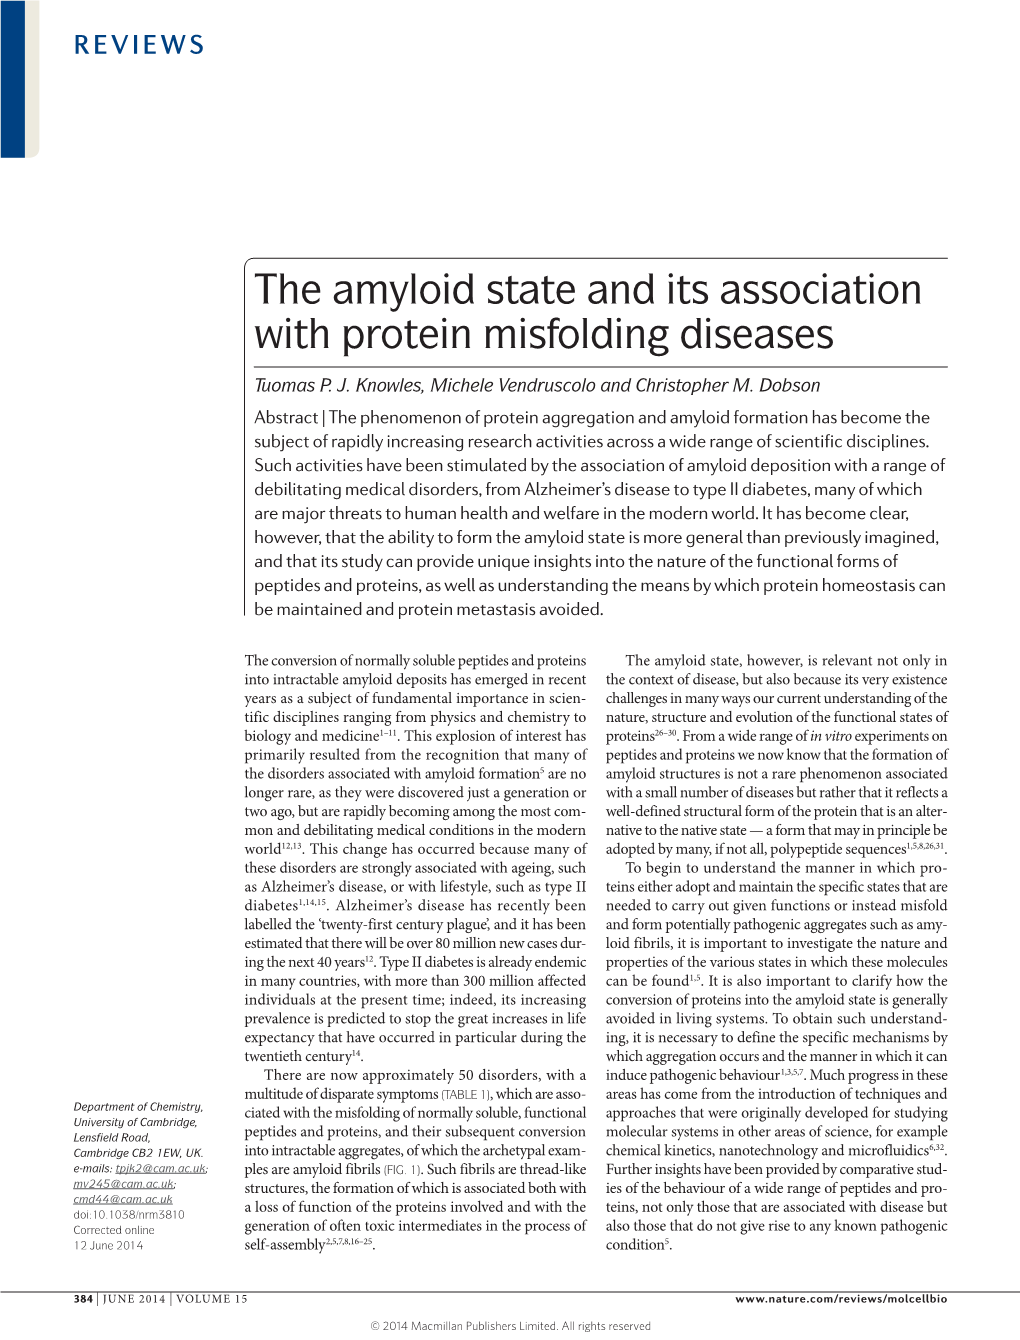 The Amyloid State and Its Association with Protein Misfolding Diseases